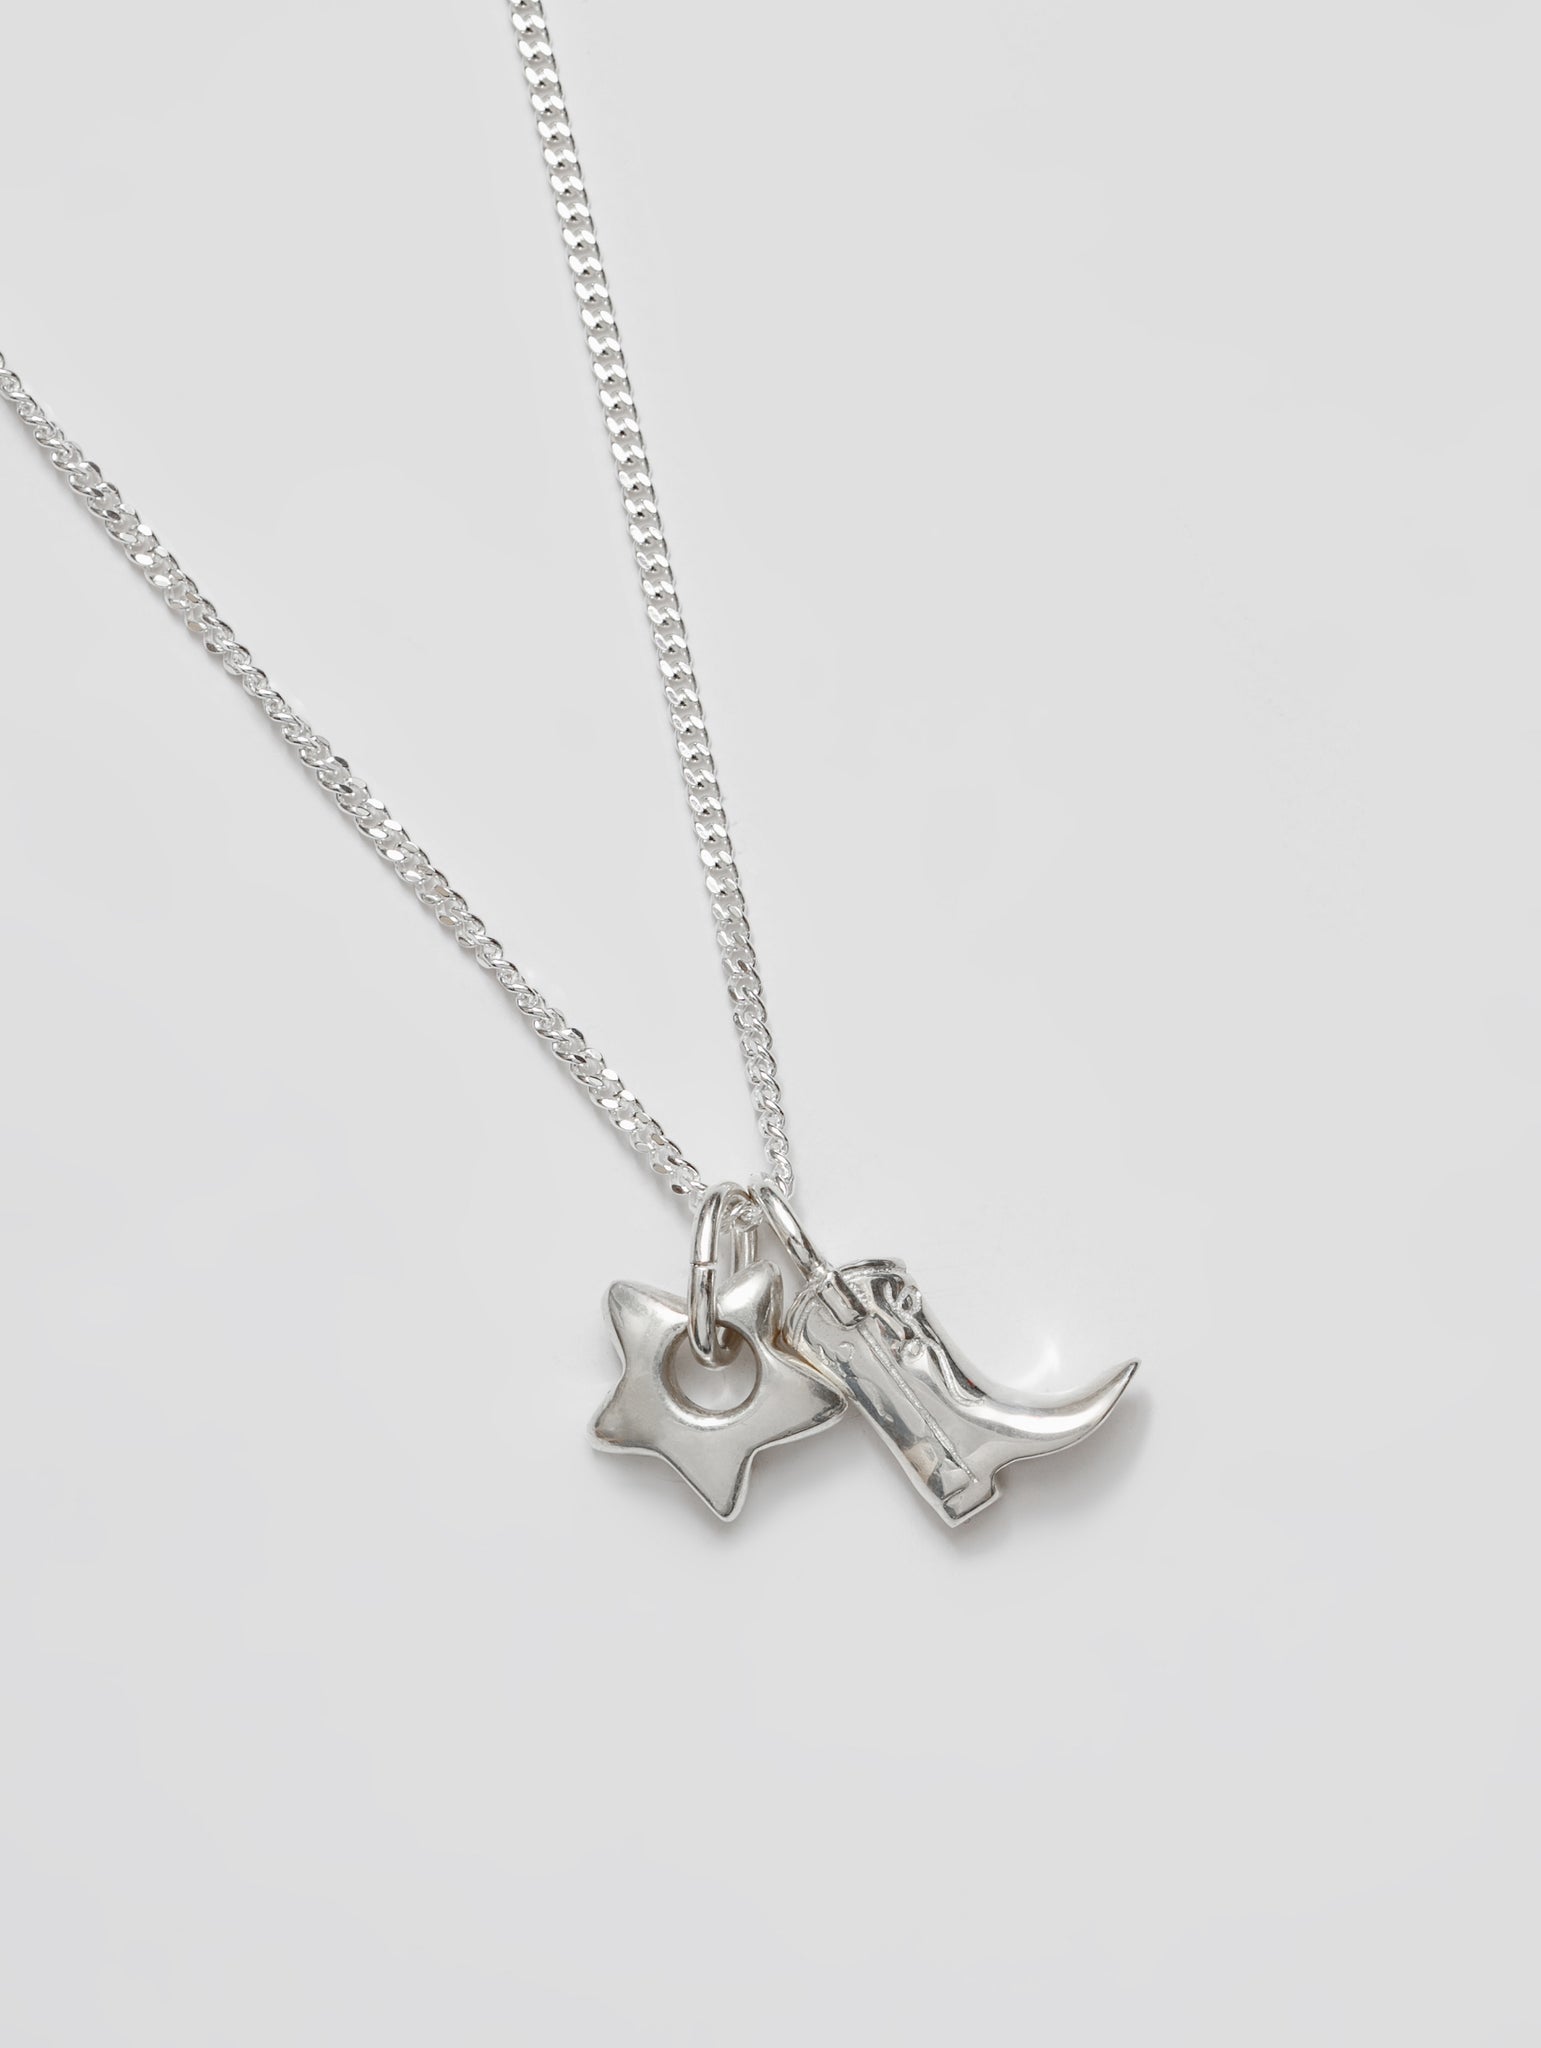 Wolf Circus Mini Cowboy Boot and Star Charm Pendant Necklace in Sterling Silver-Necklaces-wolfcircus.com